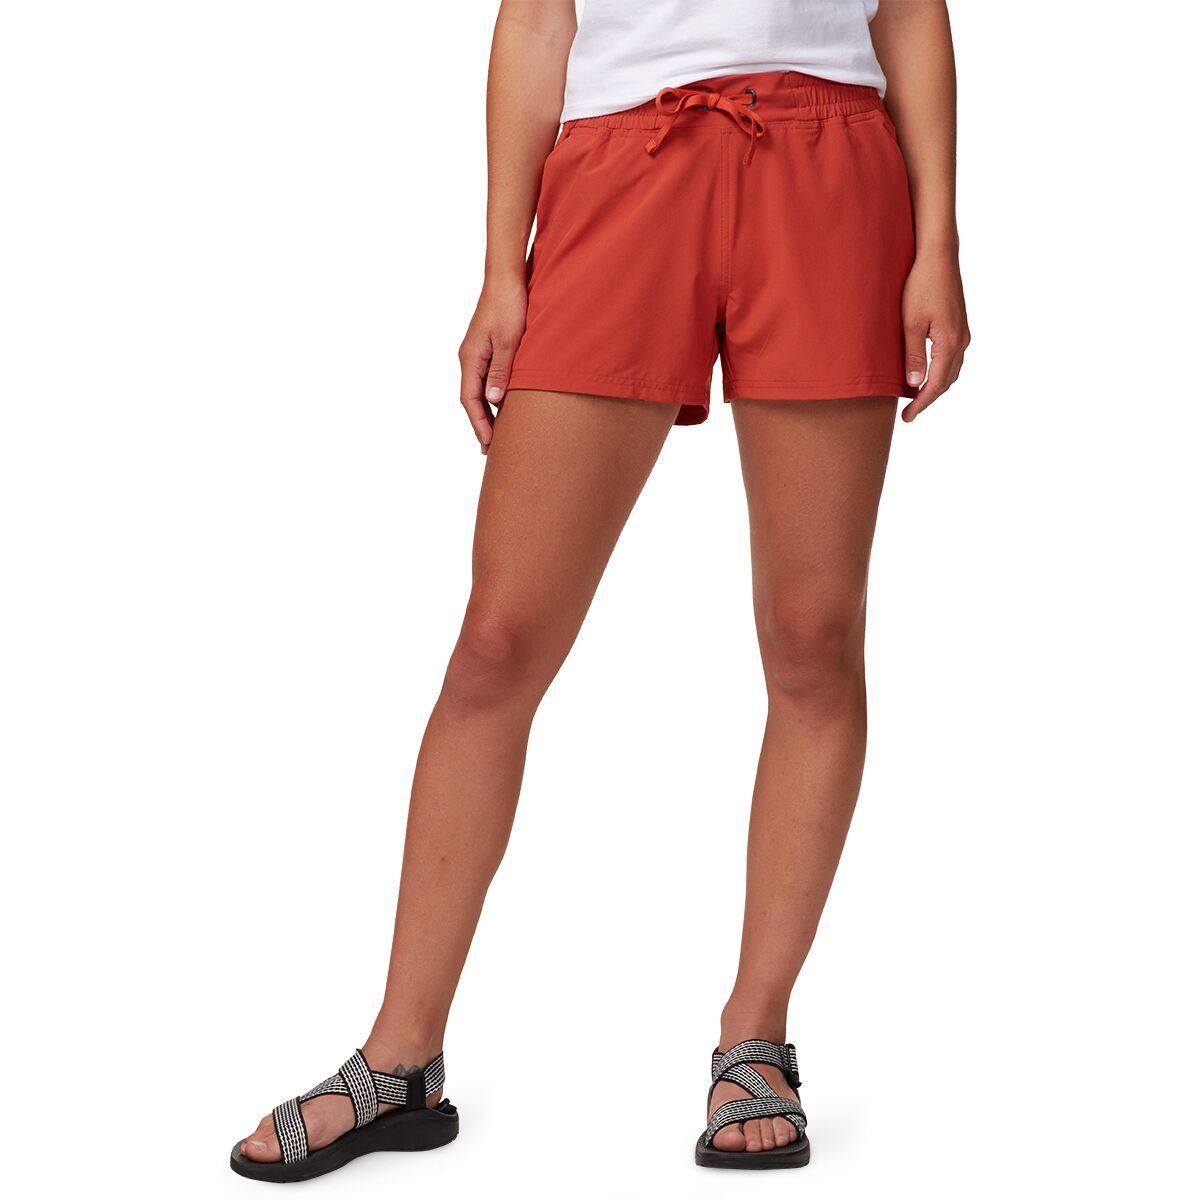 Backcountry On The Go Classic Short - Women's